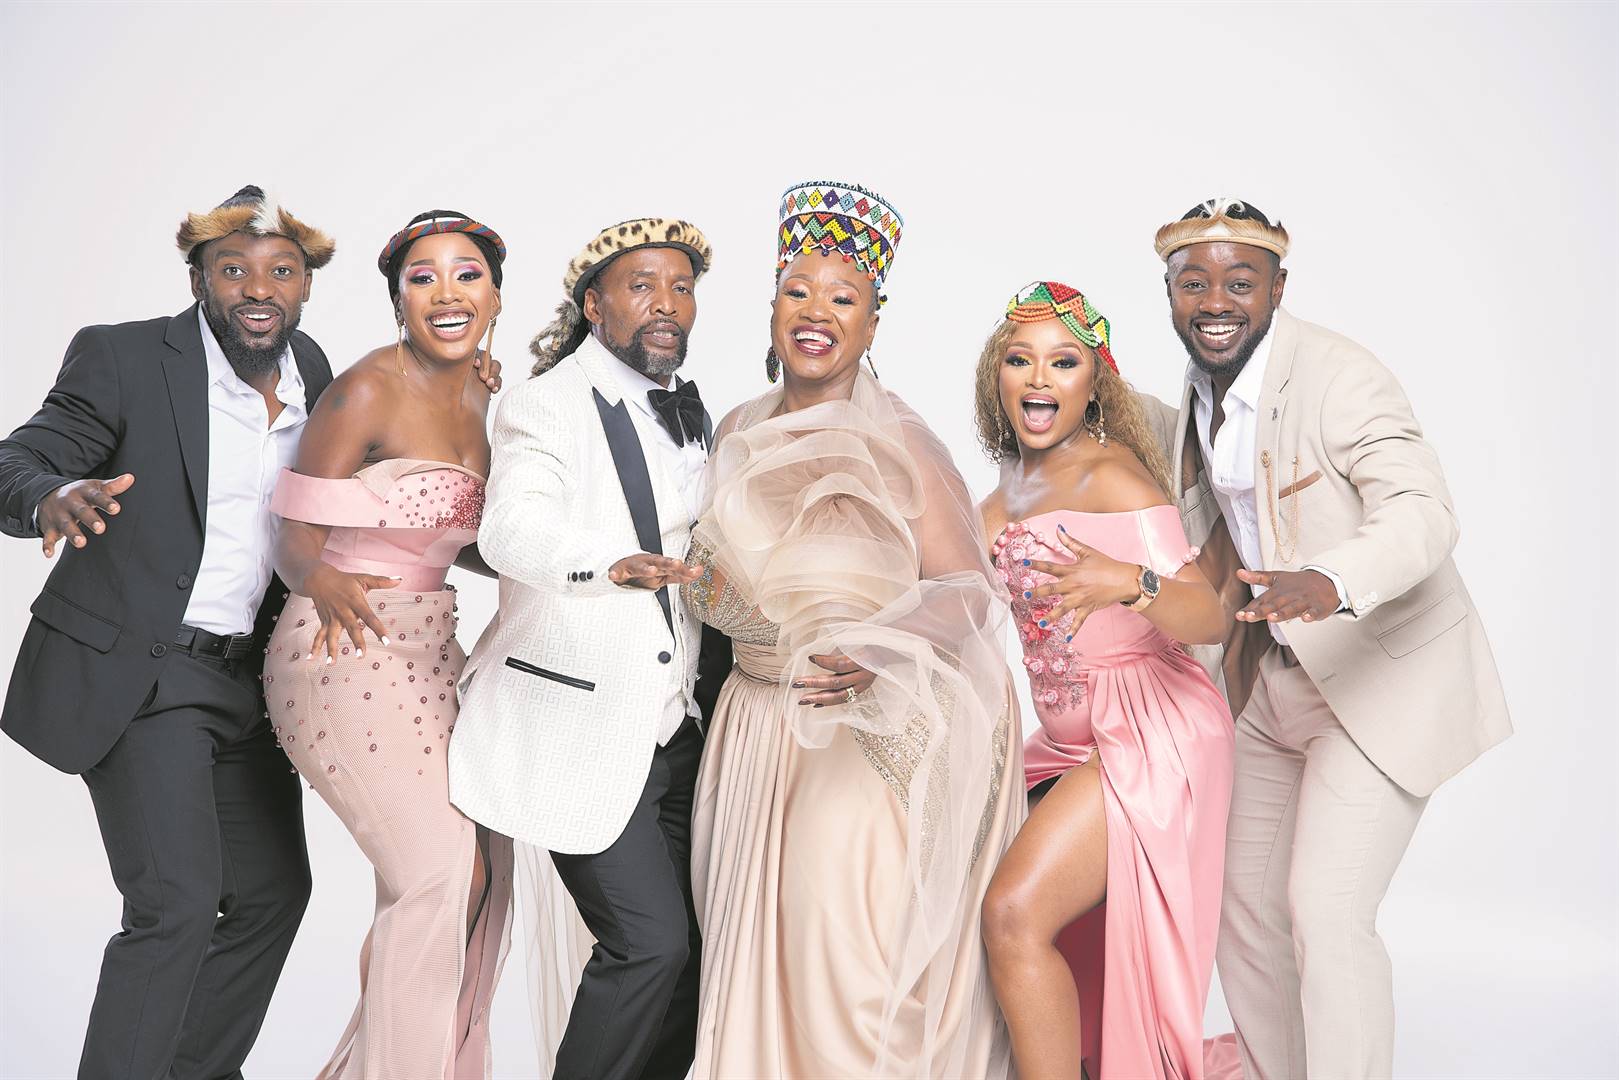 Bheki Ngcobo, better known as Ihhashi Elimhlophe (third from left) and his family, will feature in Mzansi Magic’s new reality show called Ofuze, starting on 19 January.     